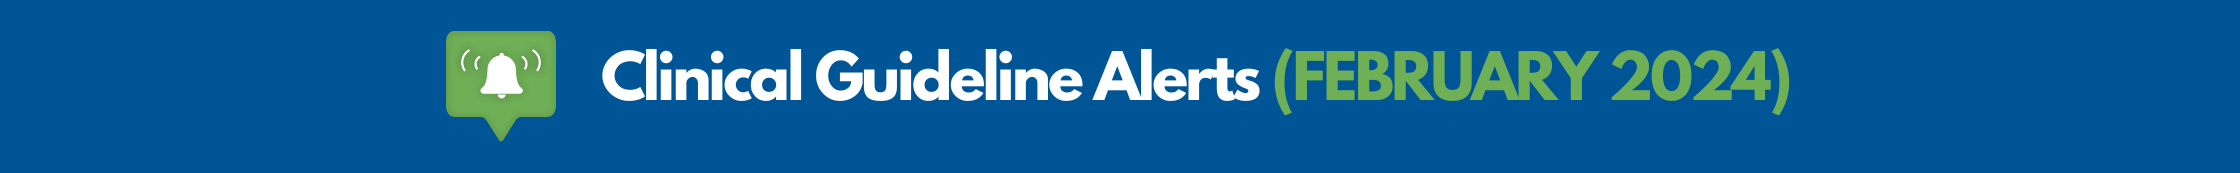 Clinical Guideline Alerts February 2024 Banner